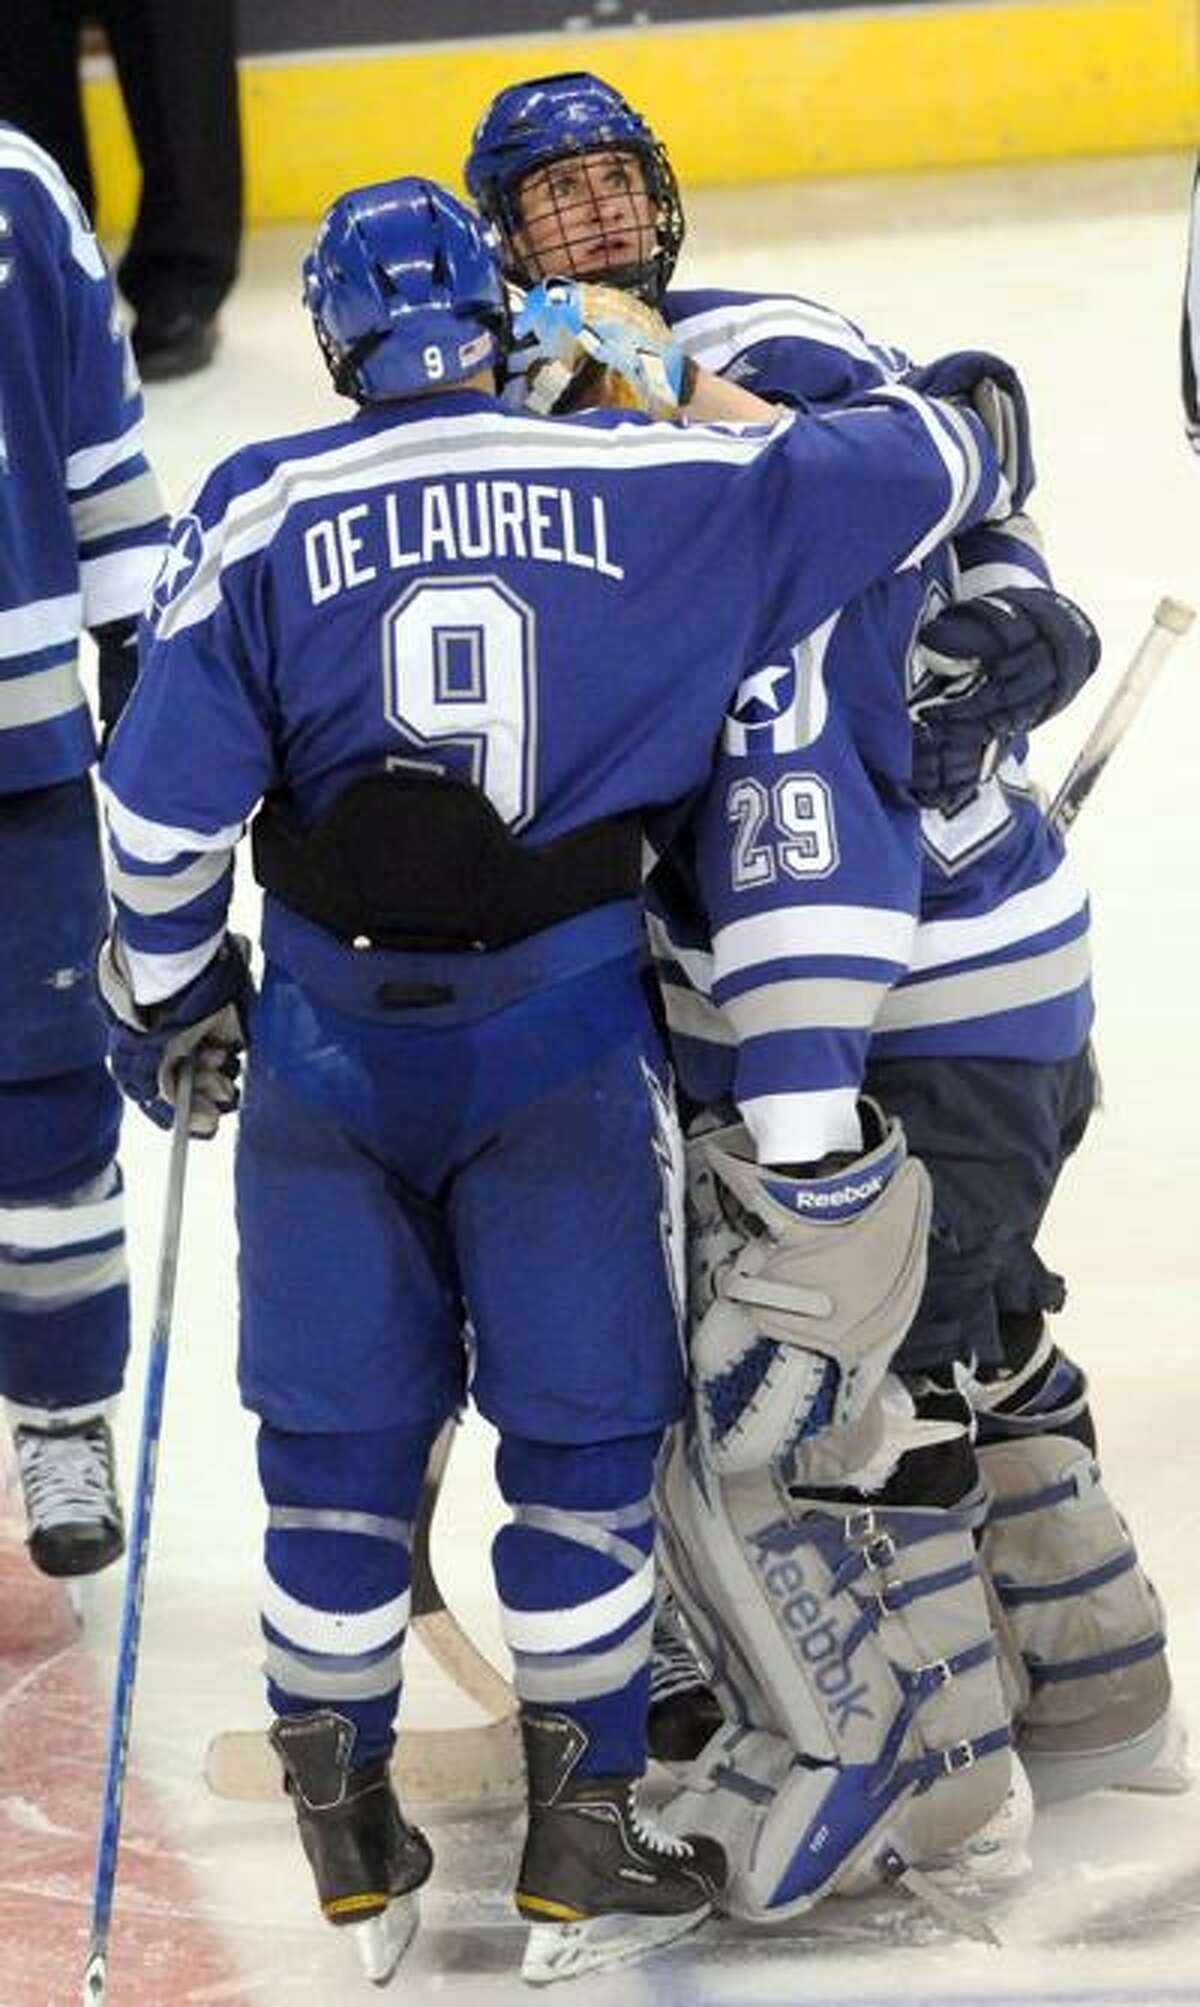 Air Force teammates Kyle DeLaurell, left, and Brad Sellers, center, console their goalie Jason Torf after Chad Ziegler of Yale scored the winning goal against goalie Jason Torf of Air Force Friday 3/25/11 during fourth period overtime action at the Arena at Harbor Yard in Bridgeport Connecticut at the 2011 NCAA Men's Ice Hockey East Regional. Photo by Peter Hvizdak / New Haven RegisterMarch 25, 2011 ph2282